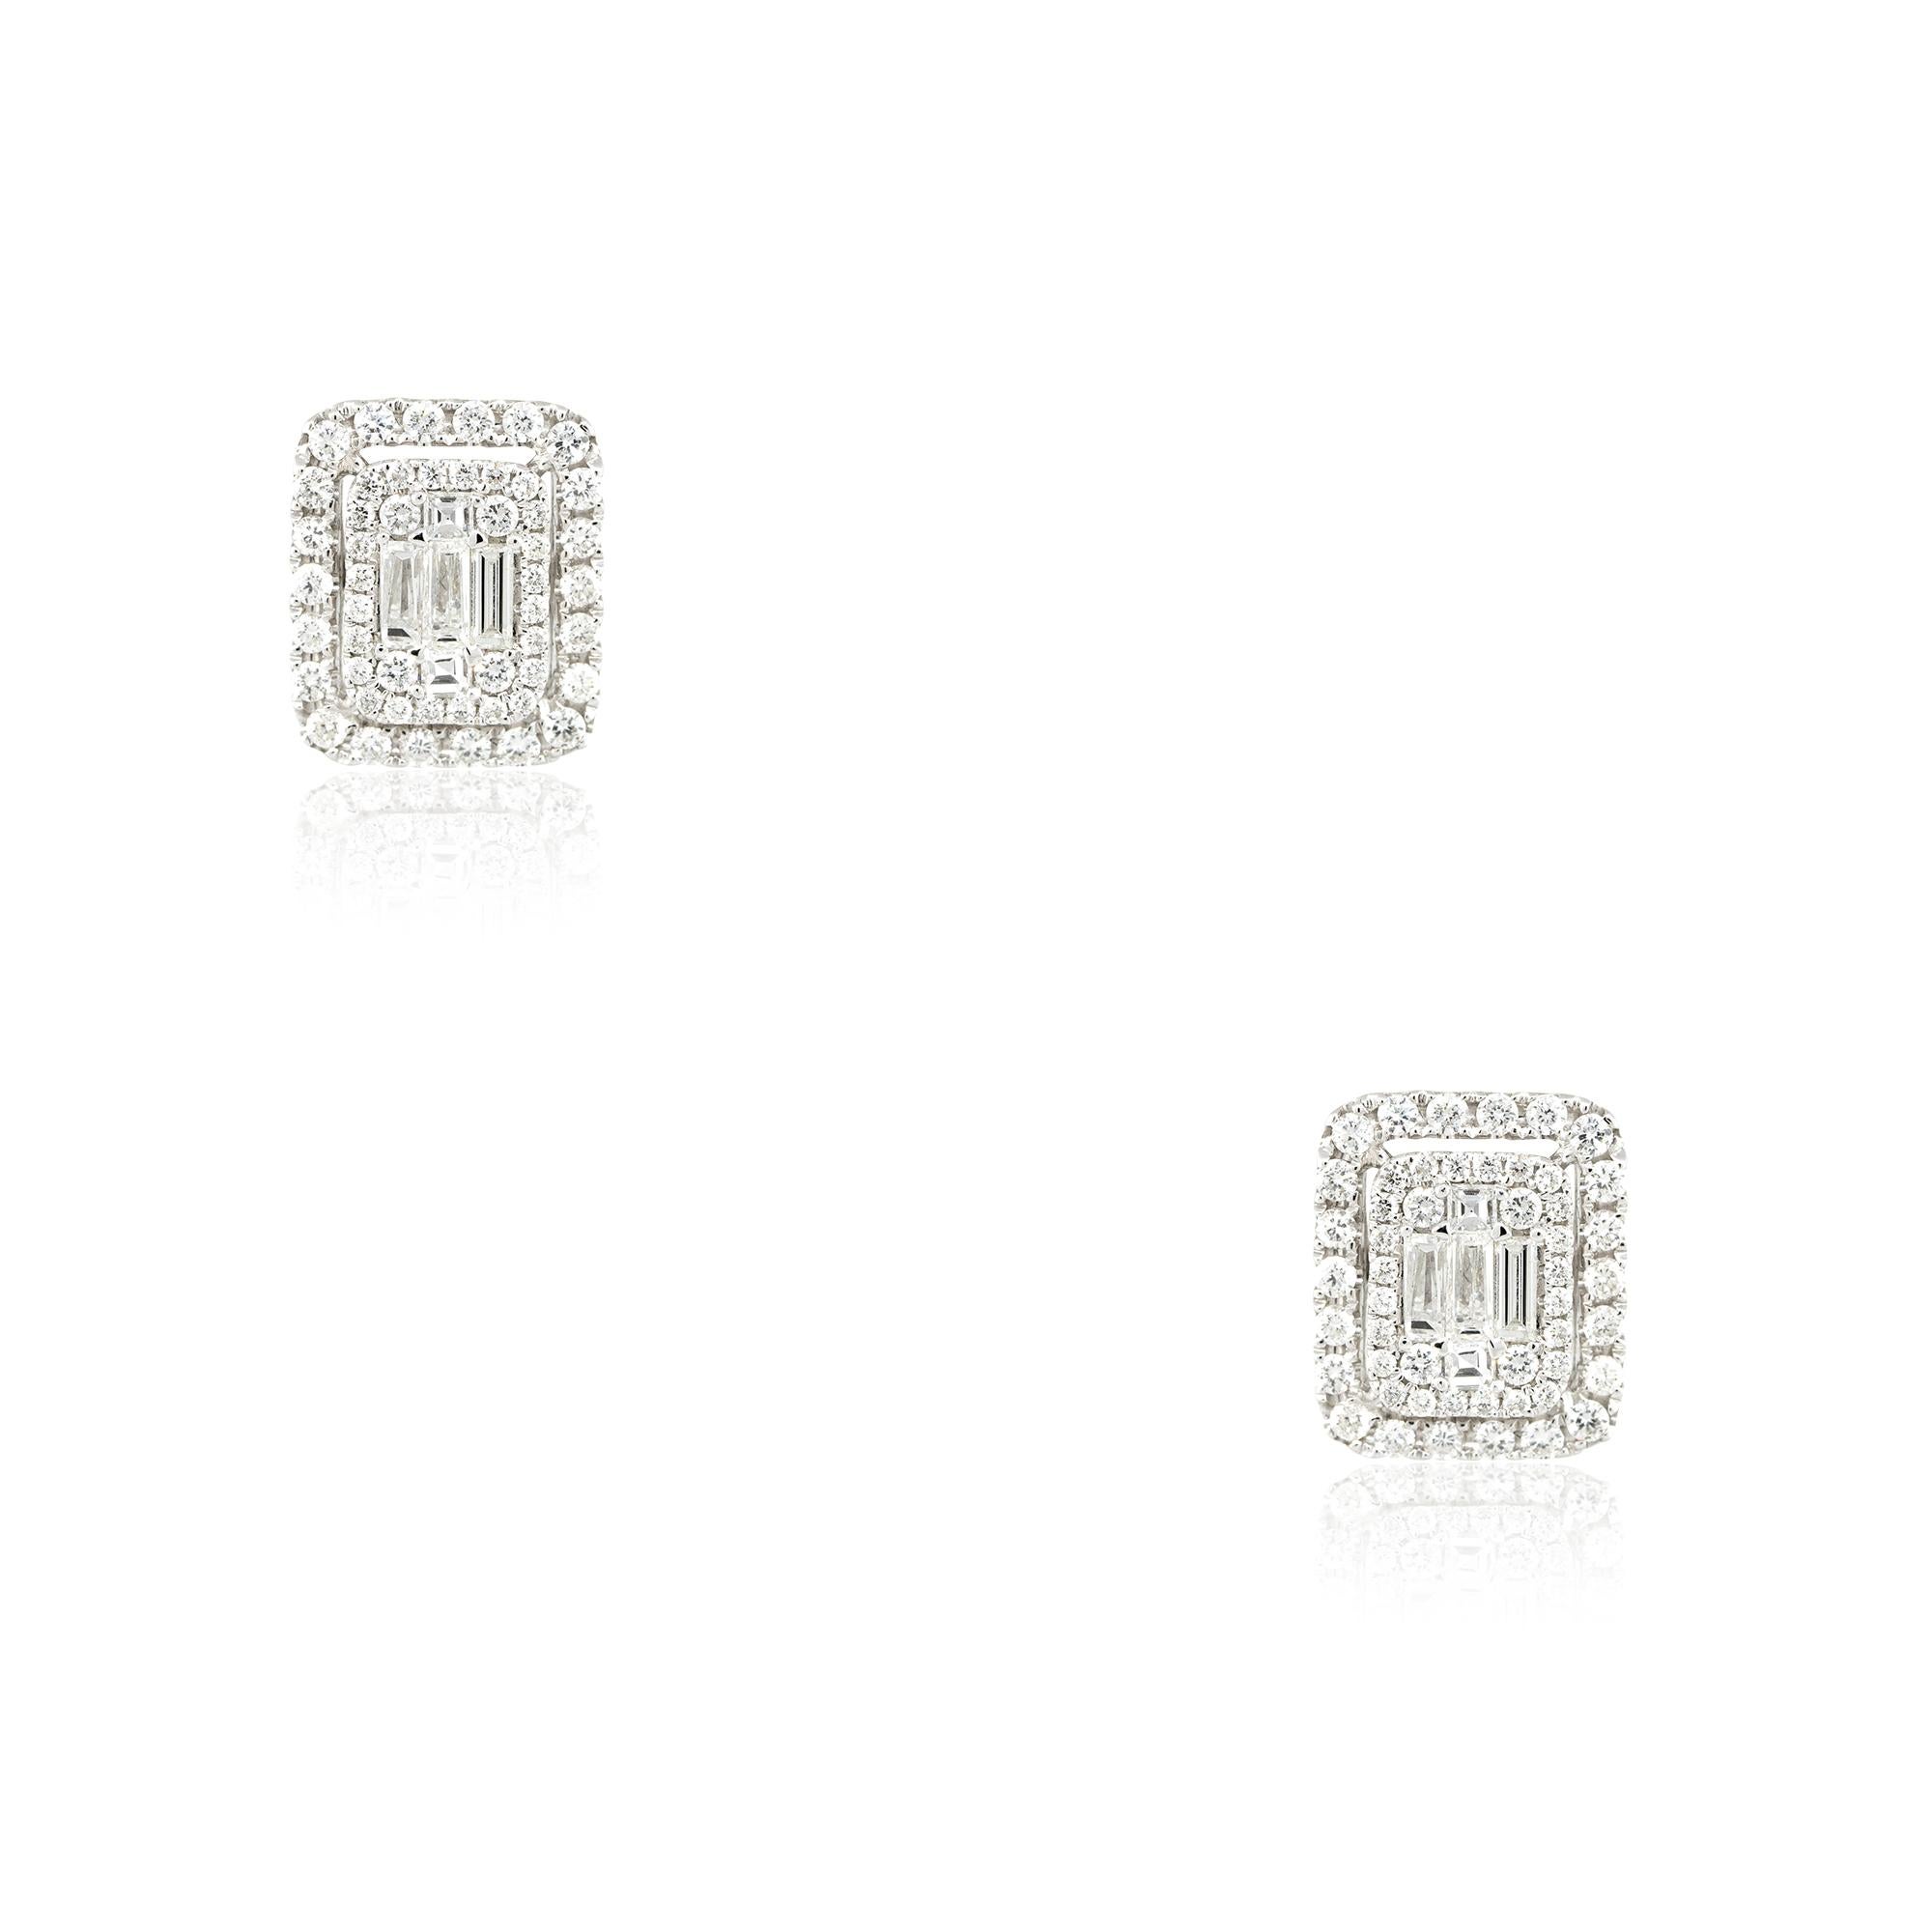 18k White Gold 1.97ctw Multi-Shape Diamond Halo Rectangular Stud Earrings
Material: 18k White Gold
Diamond Details: Diamonds are approximately 1.97ctw of Round Brilliant and Baguette cut Diamonds. There are 50 diamonds total and all diamonds are